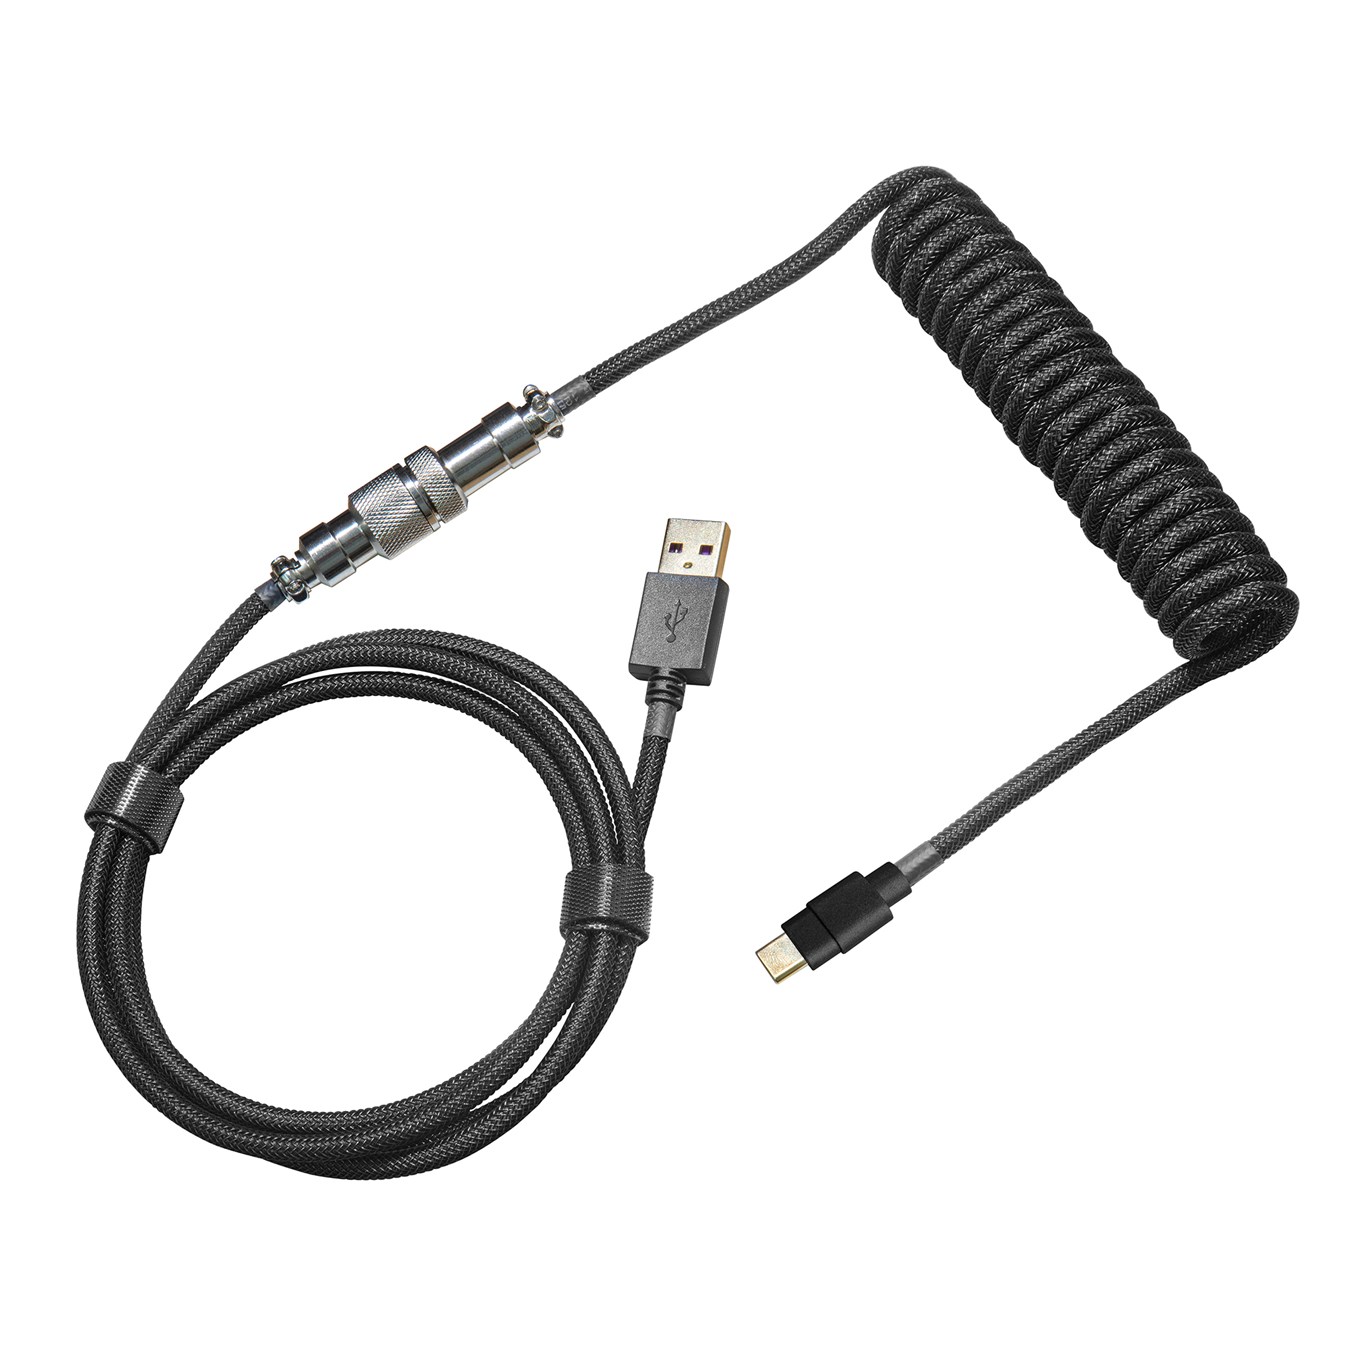 Coiled Keyboard Cable - Black - USB Type-A to USB Type-C connector